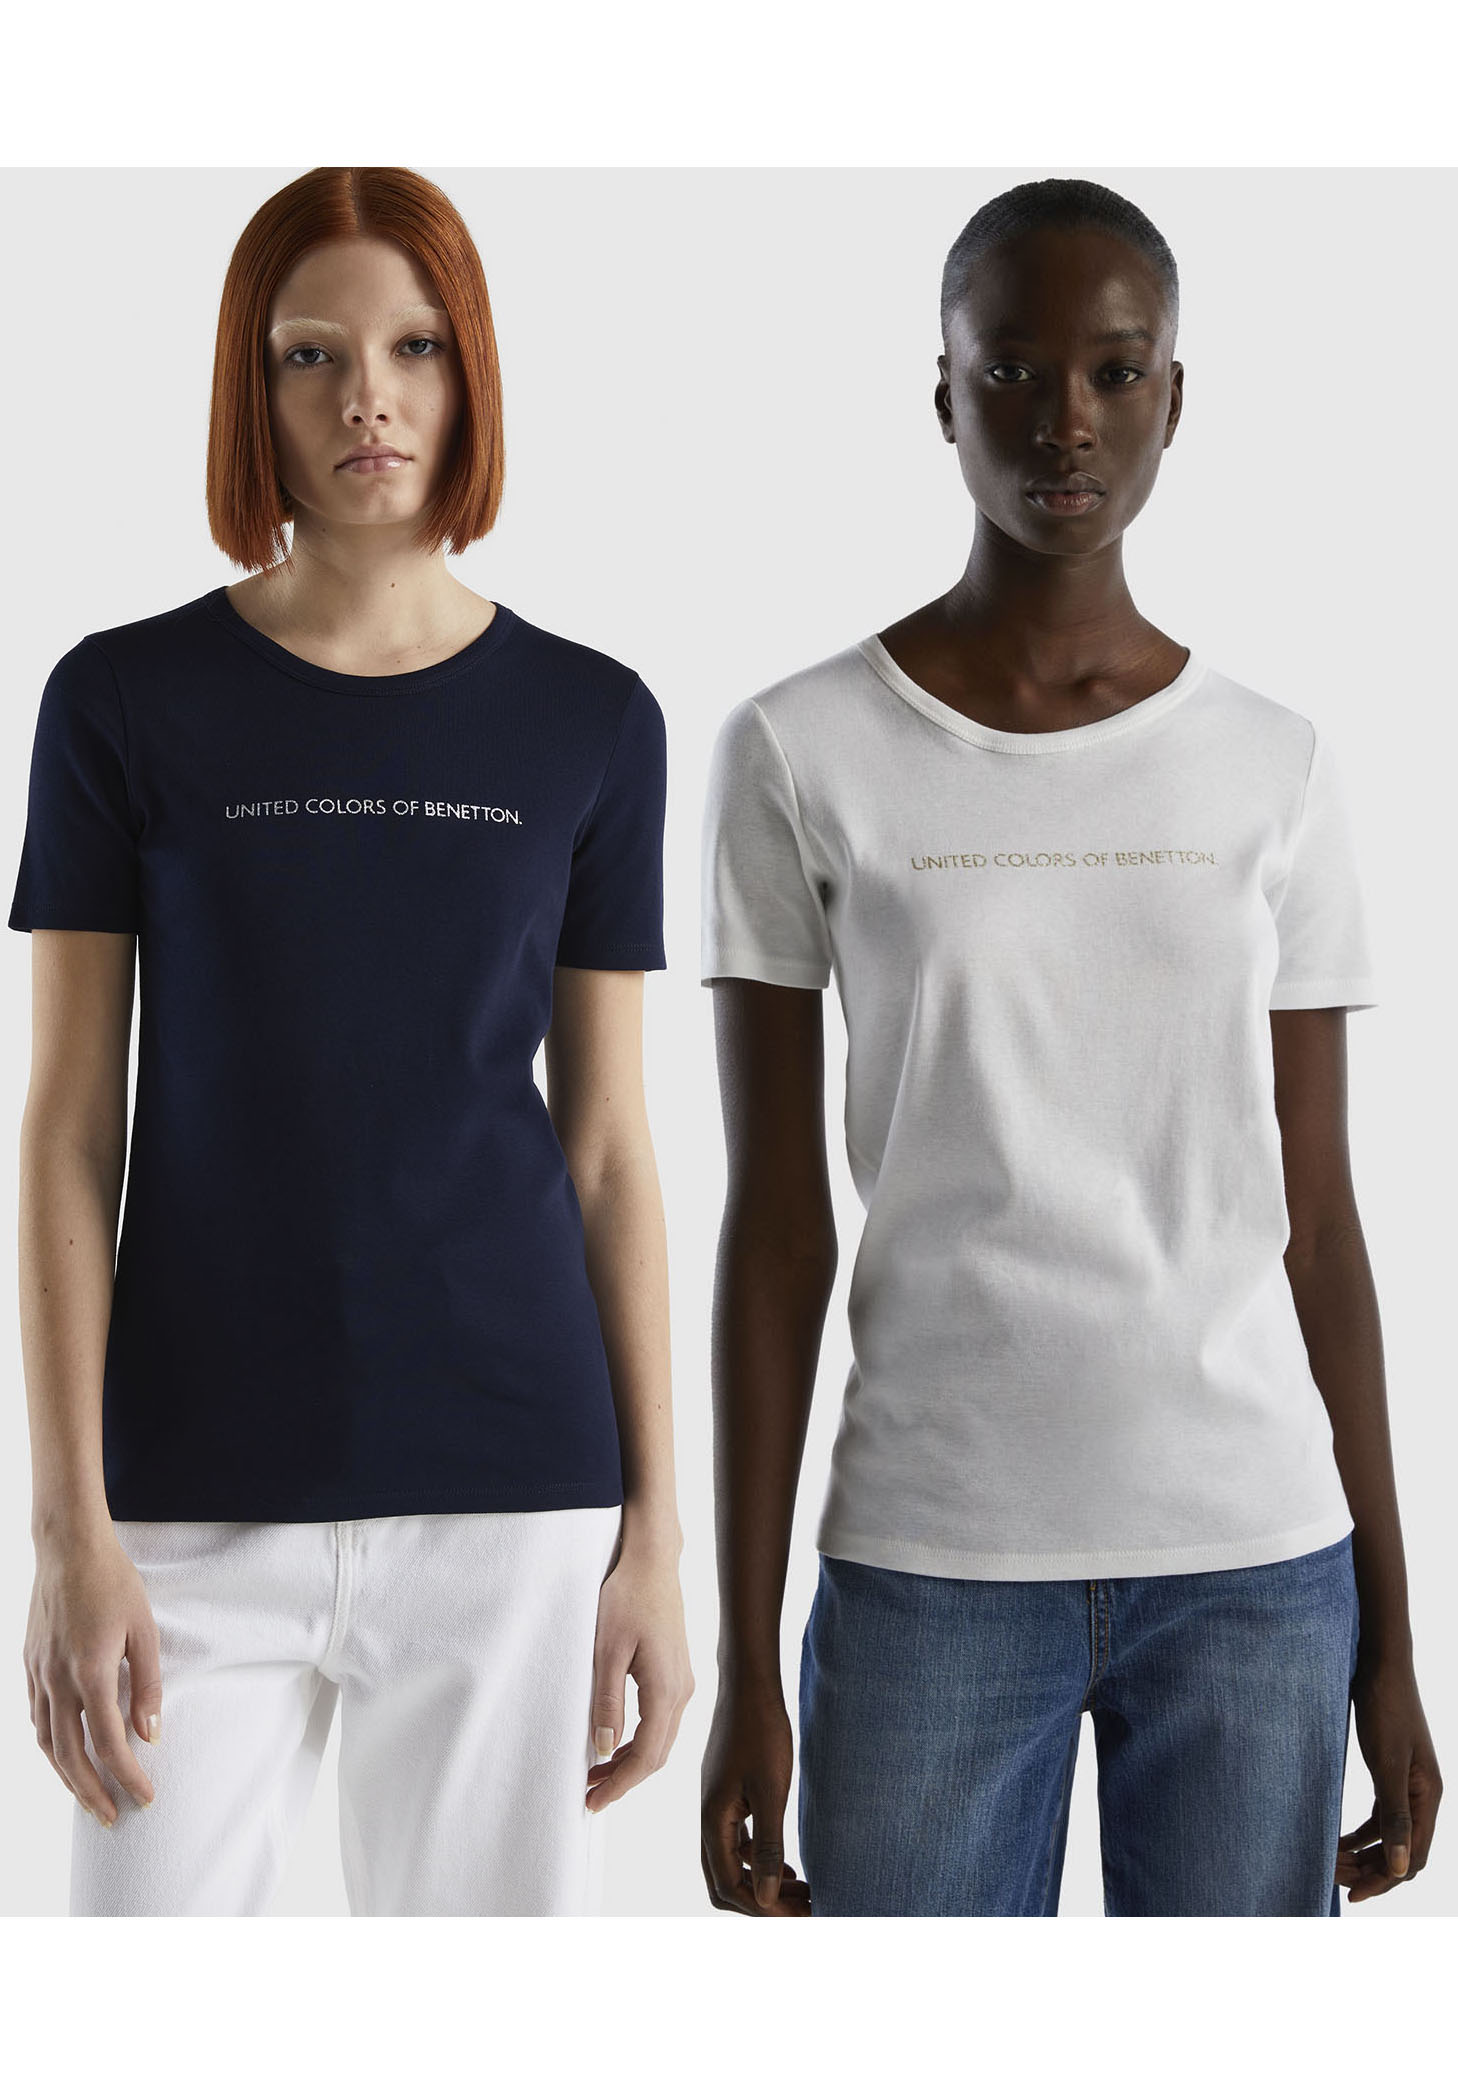 United Colors of Benetton T-Shirt, unsere Bestseller im Doppelpack von United Colors of Benetton